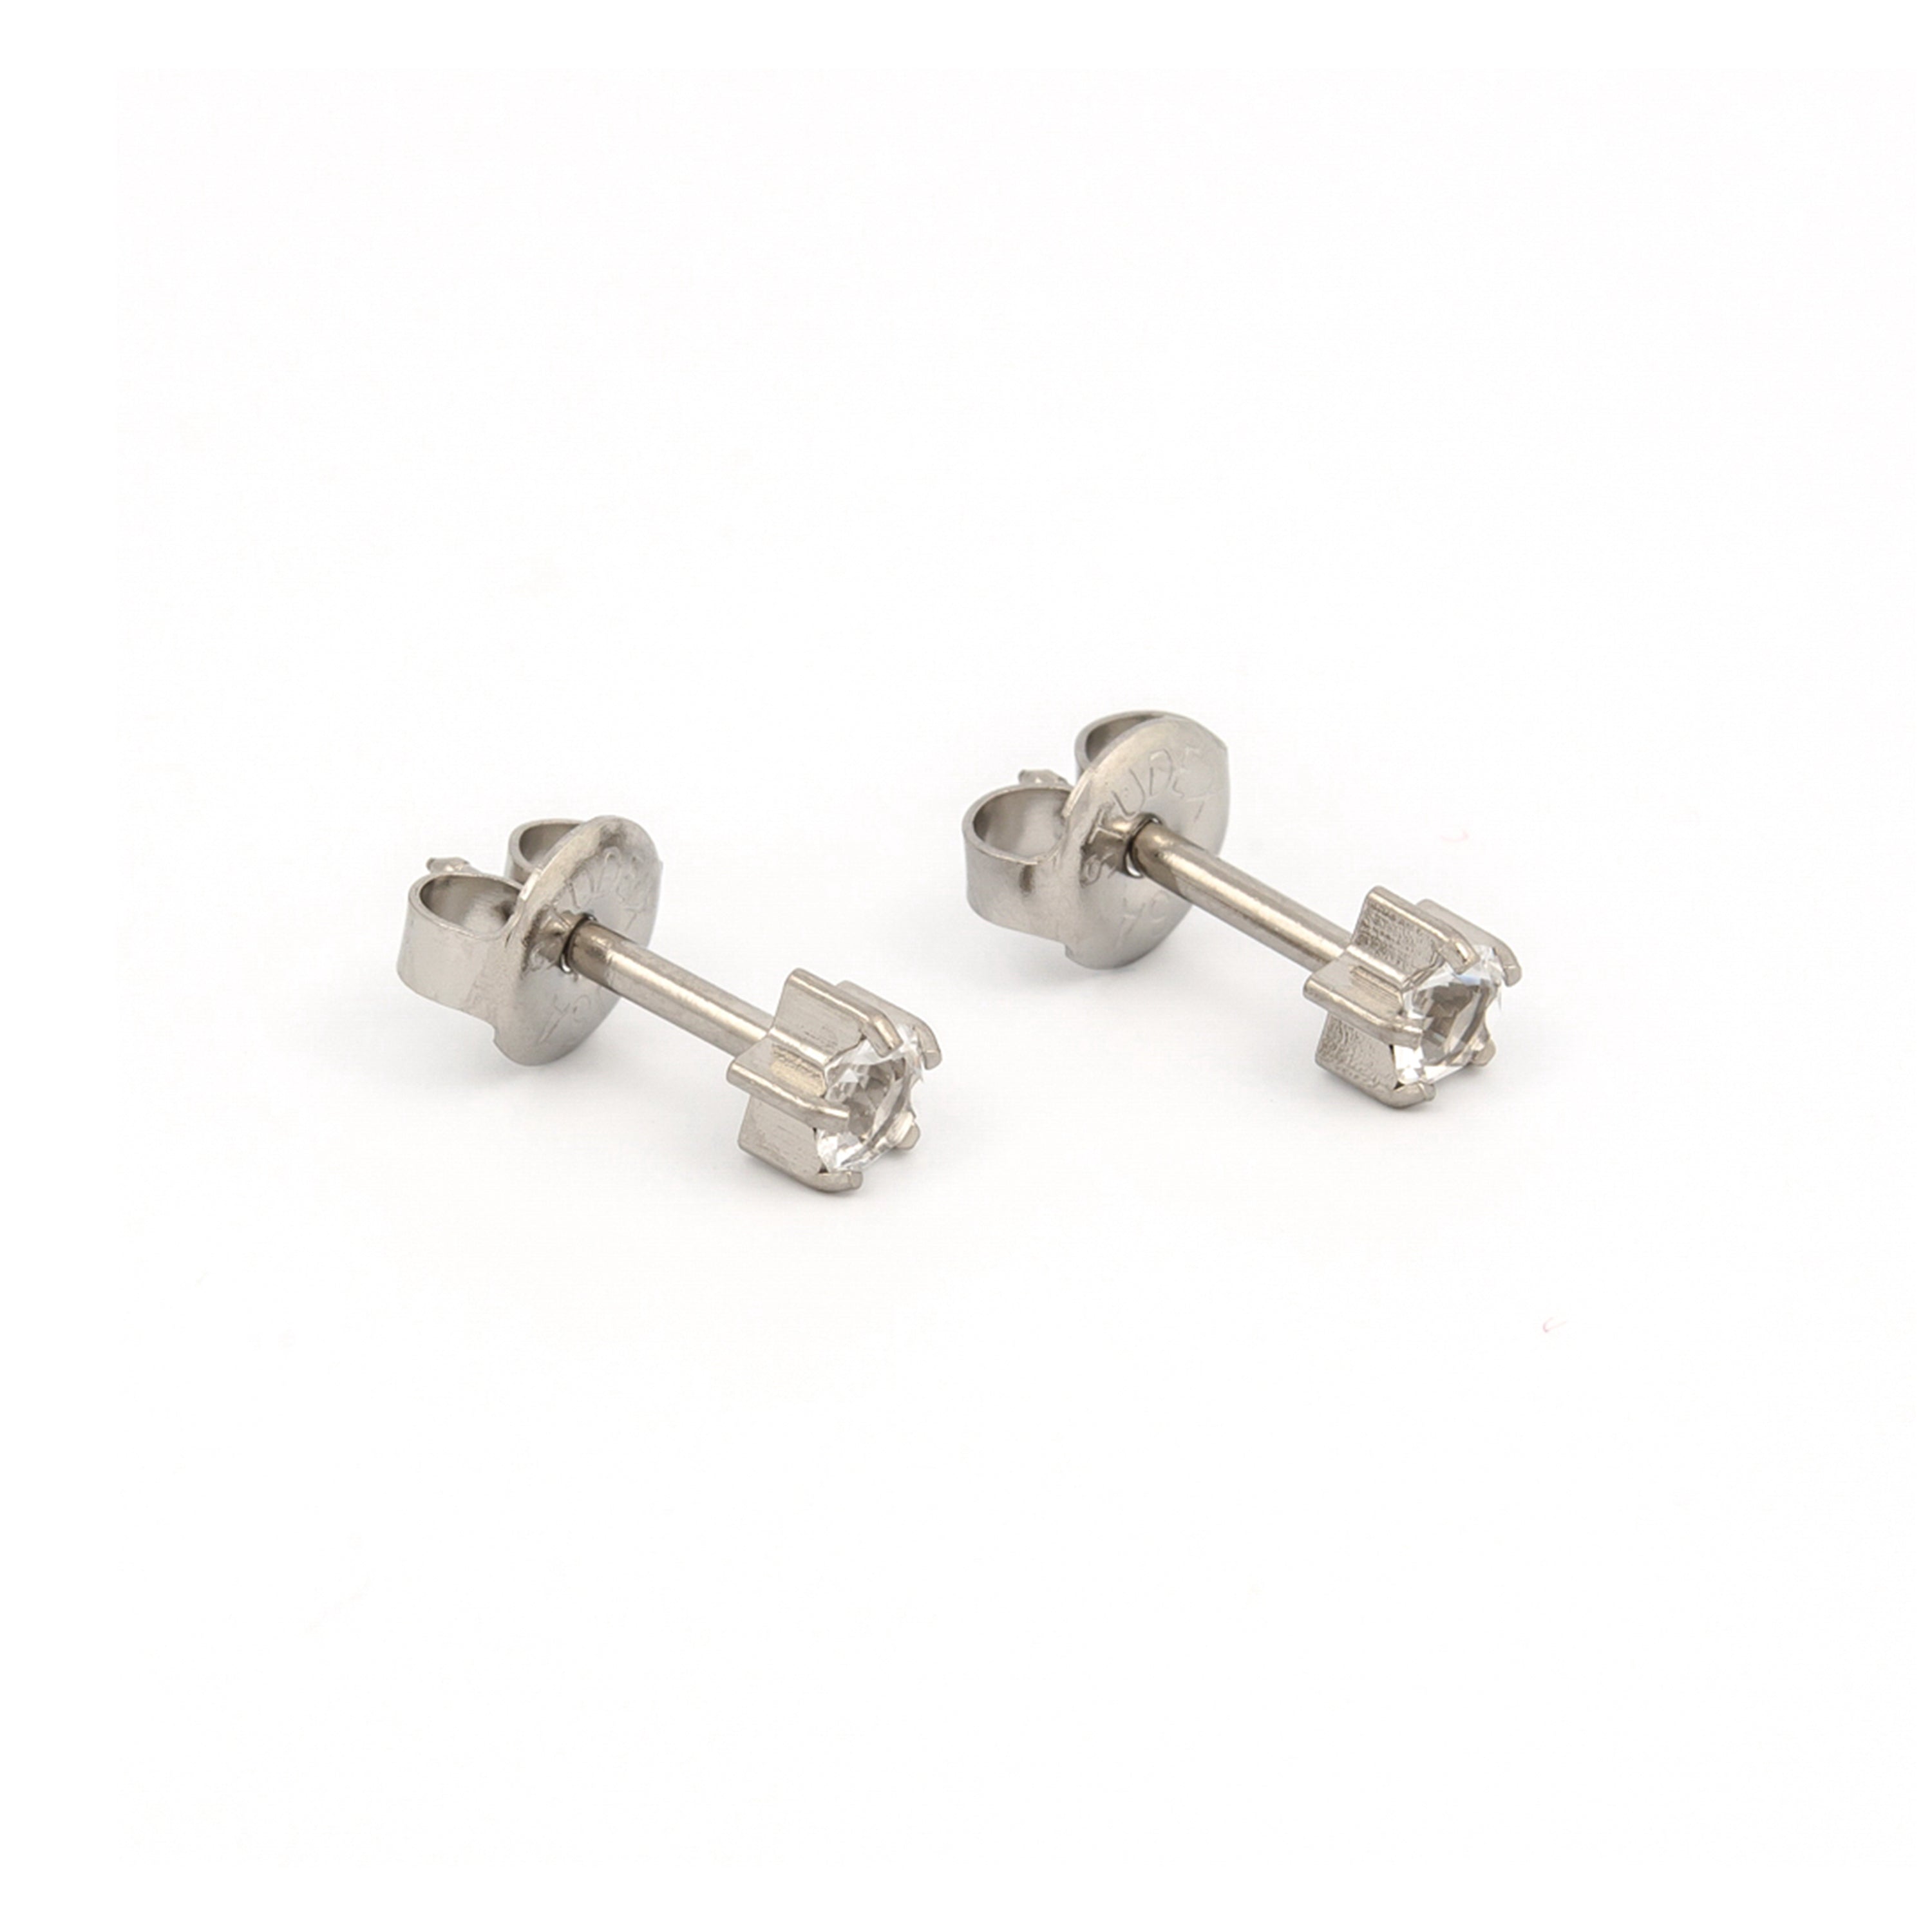 4MM April – Crystal Birthstone Allergy free Stainless Steel Ear Studs | MADE IN USA | Ideal for everyday wear